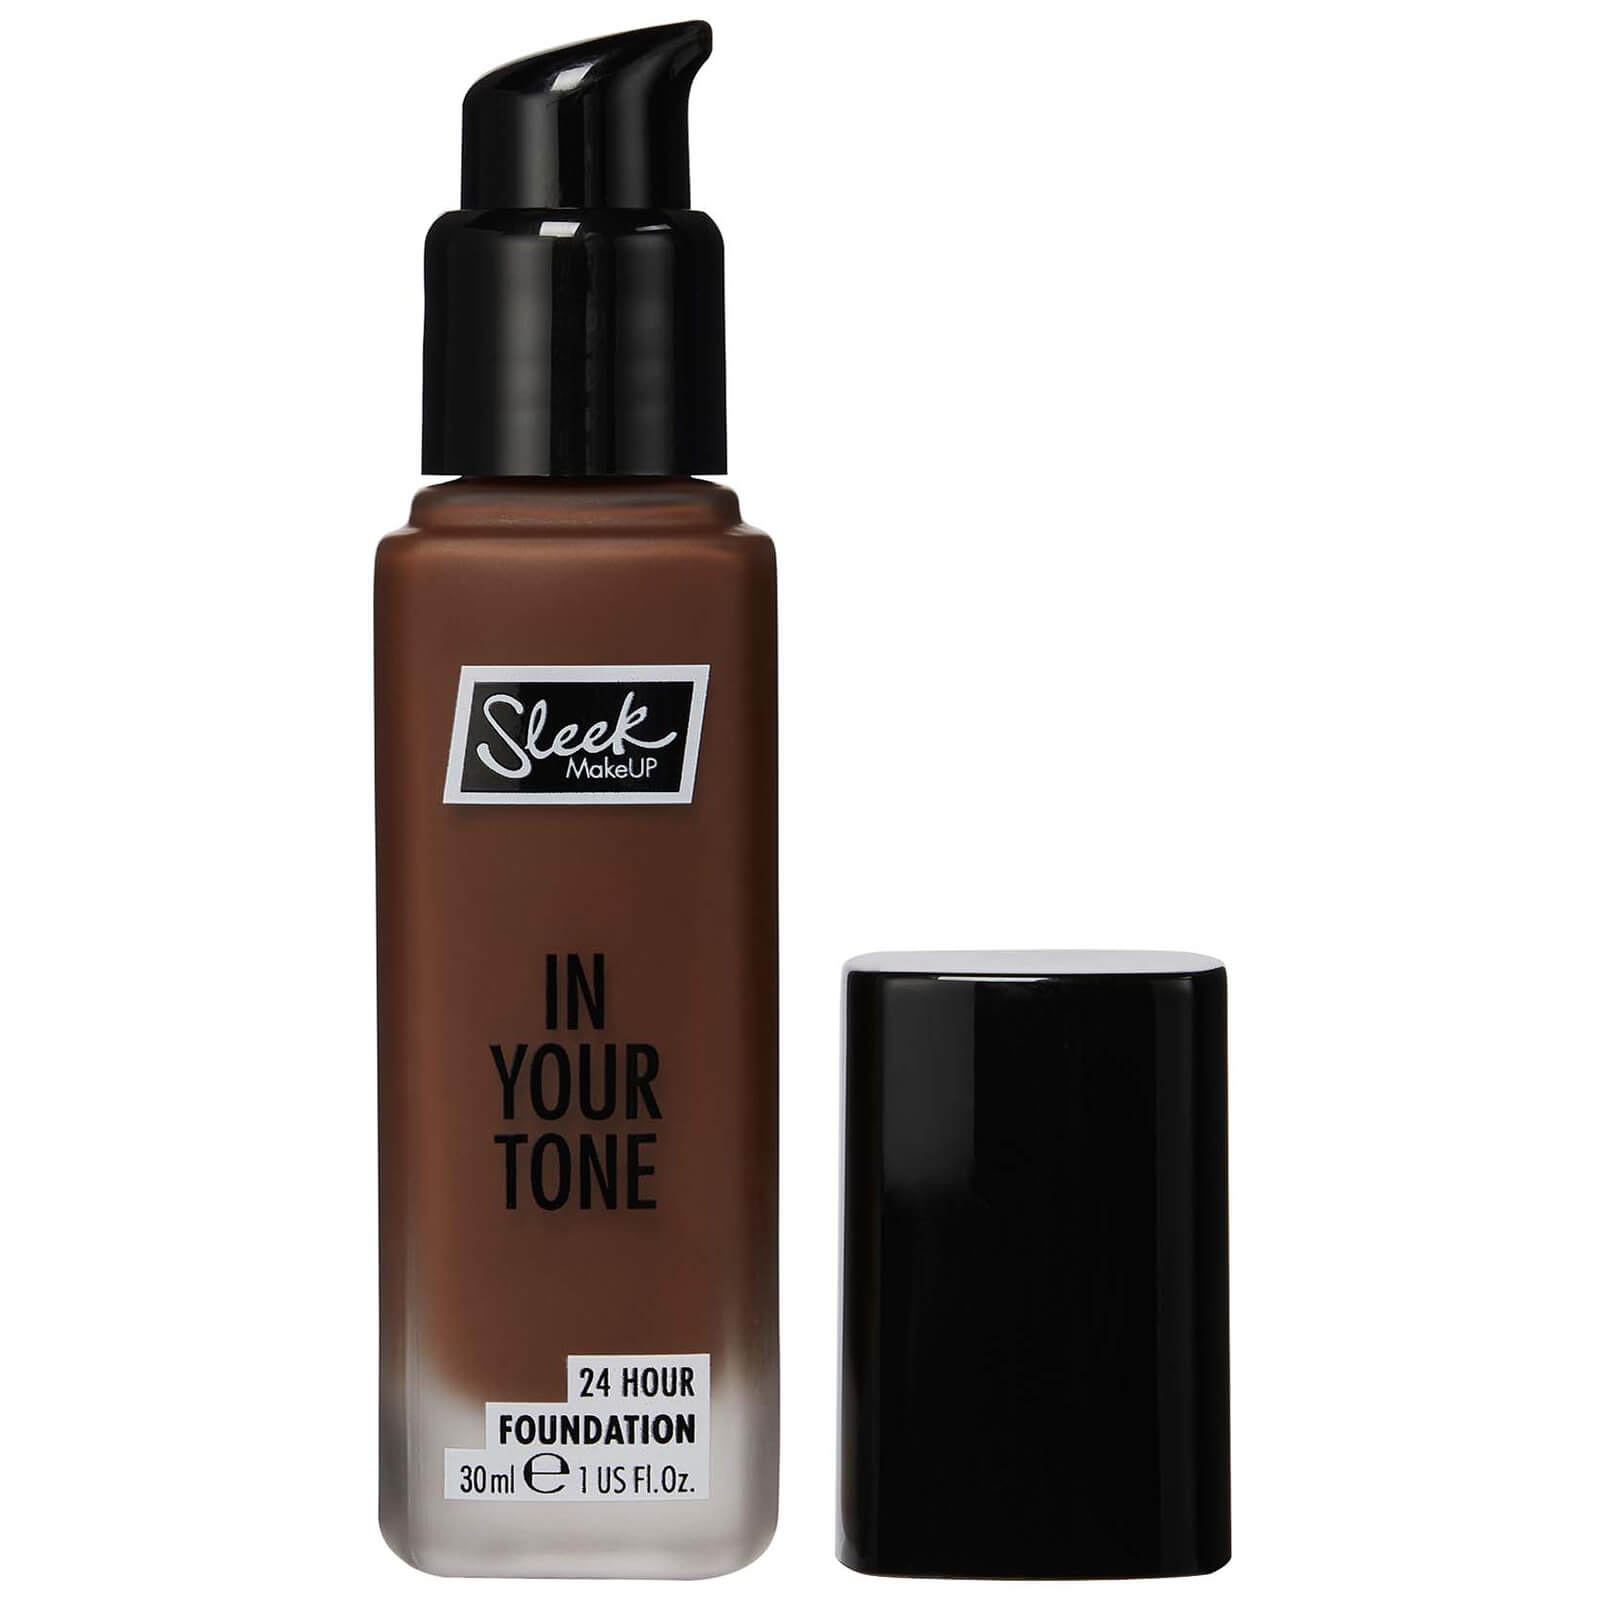 Sleek MakeUP in Your Tone 24 Hour Foundation 30ml (Various Shades) - 13N